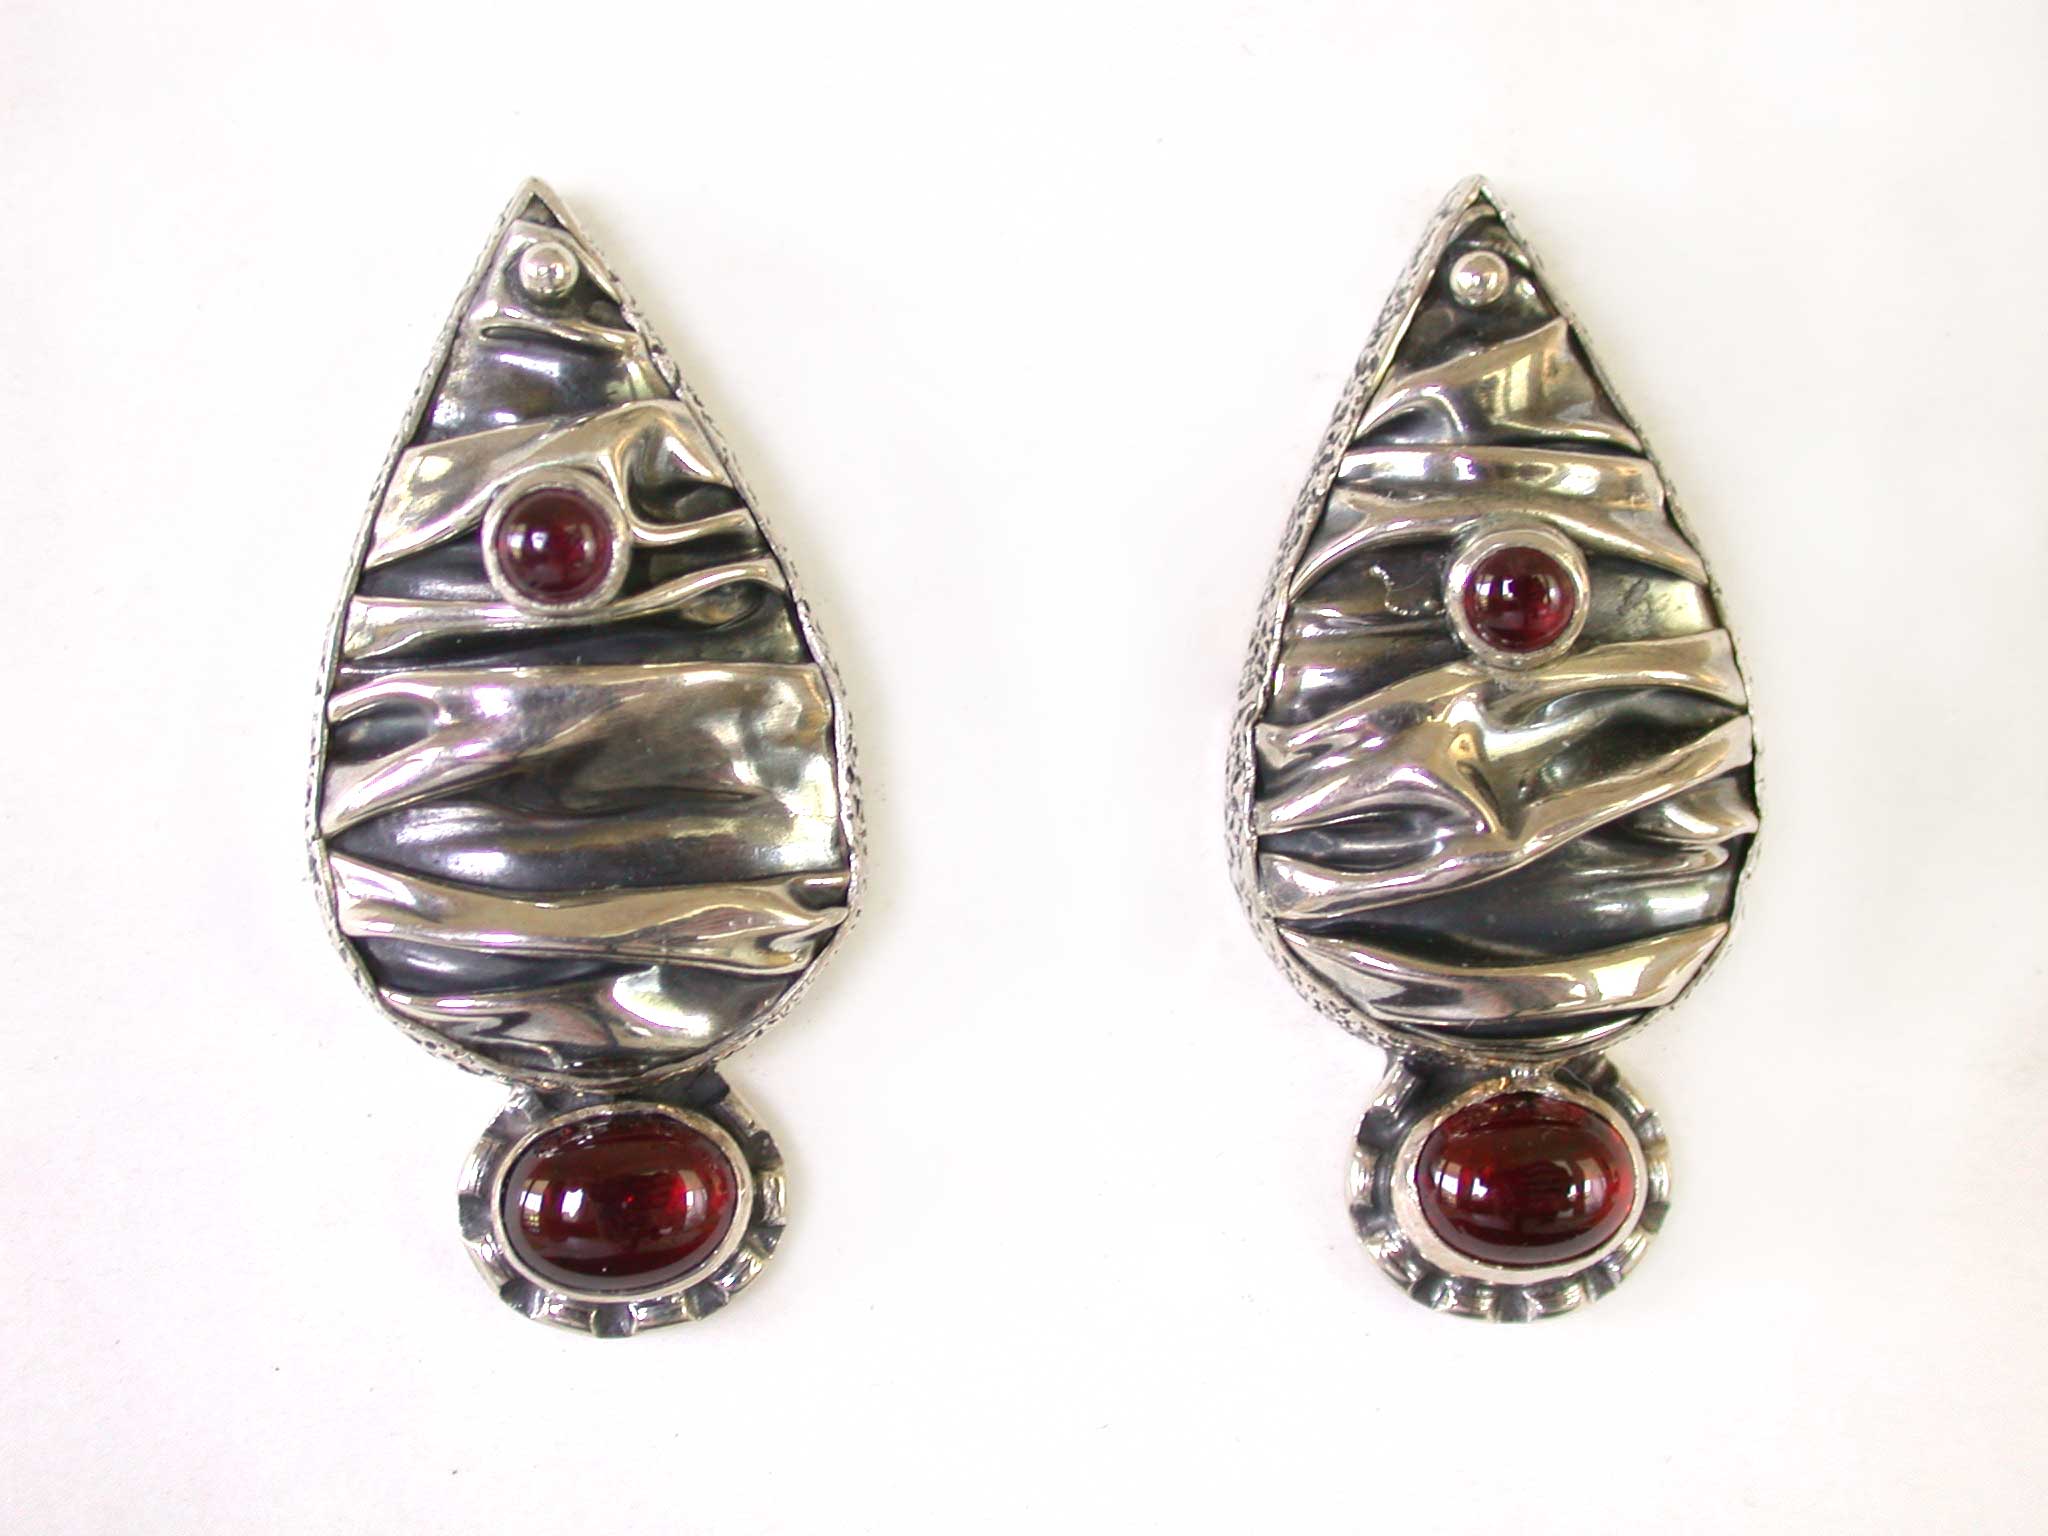 Amy Kahn Russell Online Trunk Show: Sterling Silver and Garnet Clip Earrings | Rendezvous Gallery